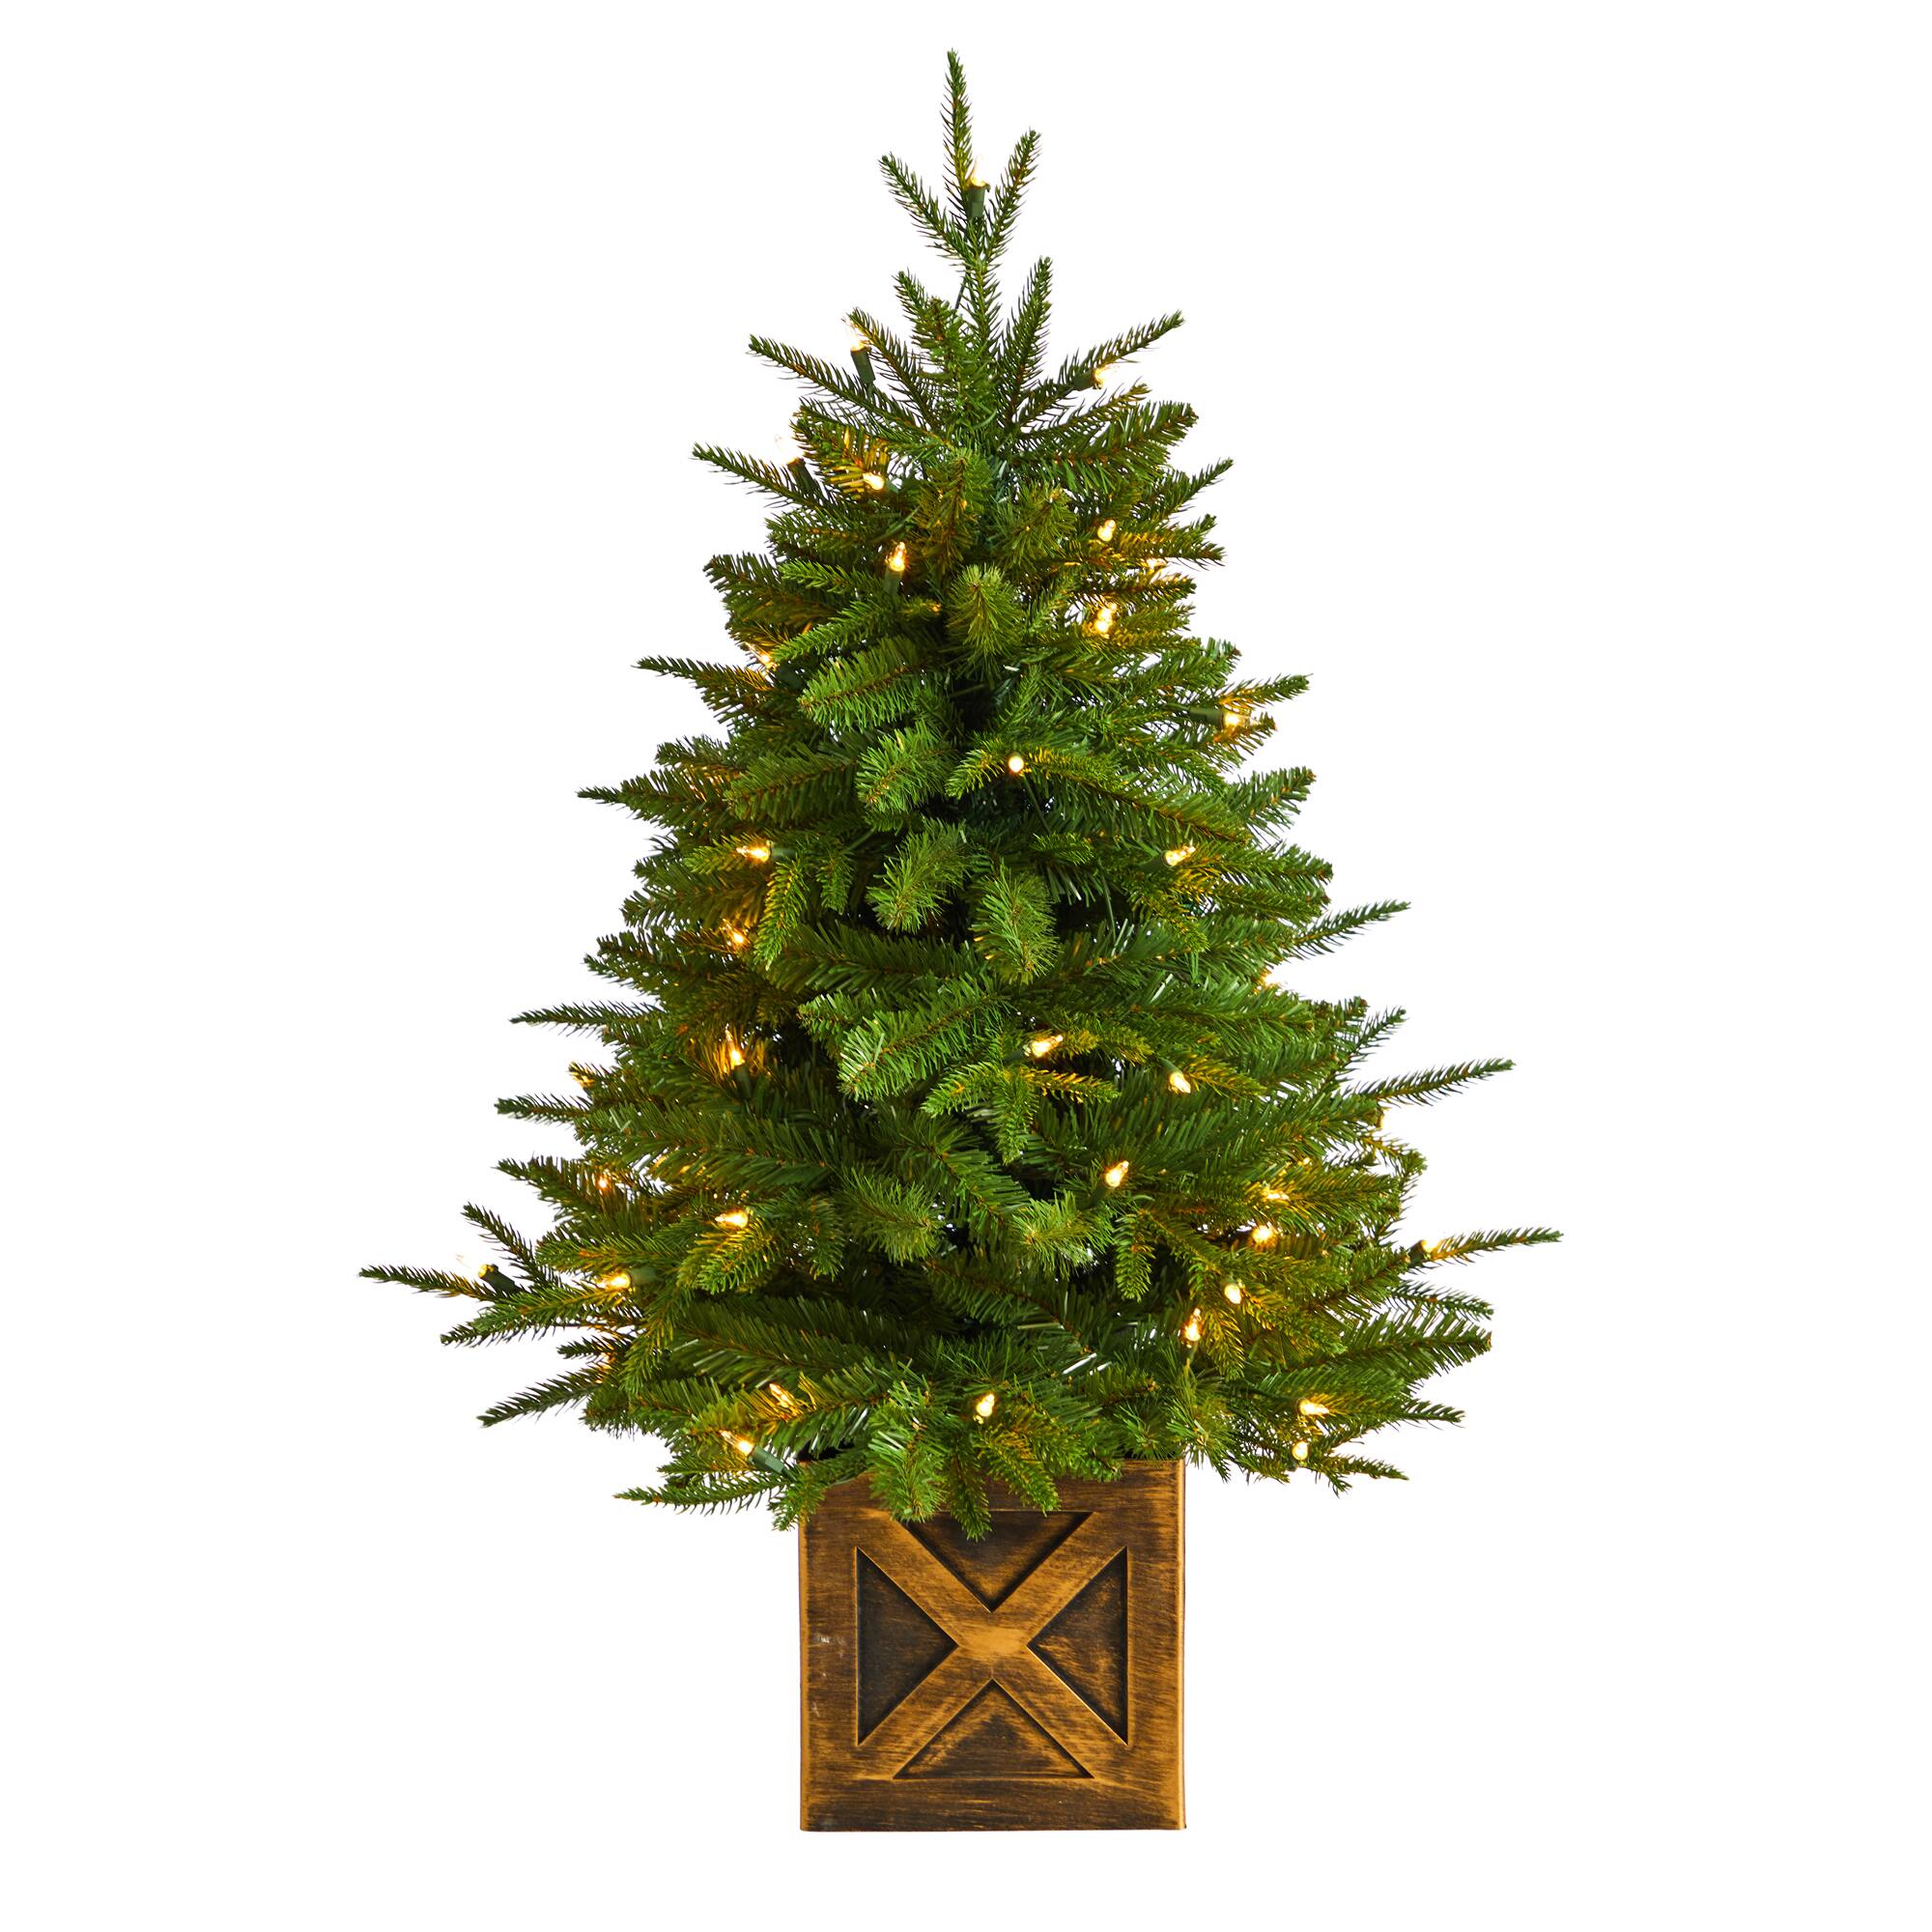 3ft. Pre-Lit Finland Fir Artificial Christmas Tree in Decorative ...